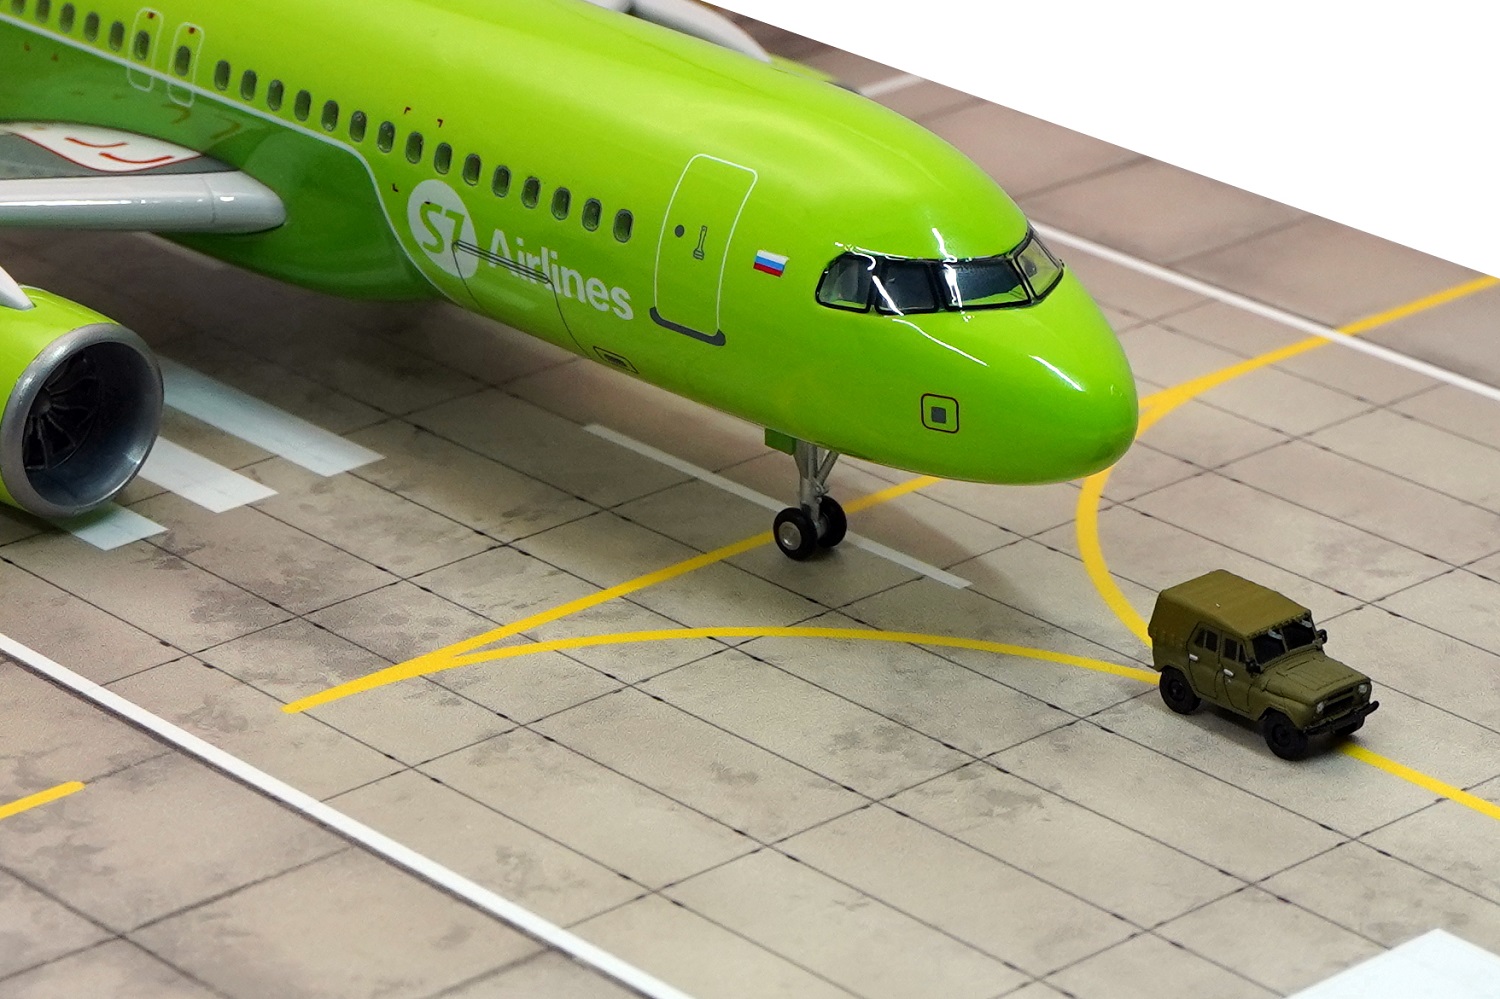   Airbus A320 Neo,  S7 Airlines .    .  # 16 hobbyplus.ru